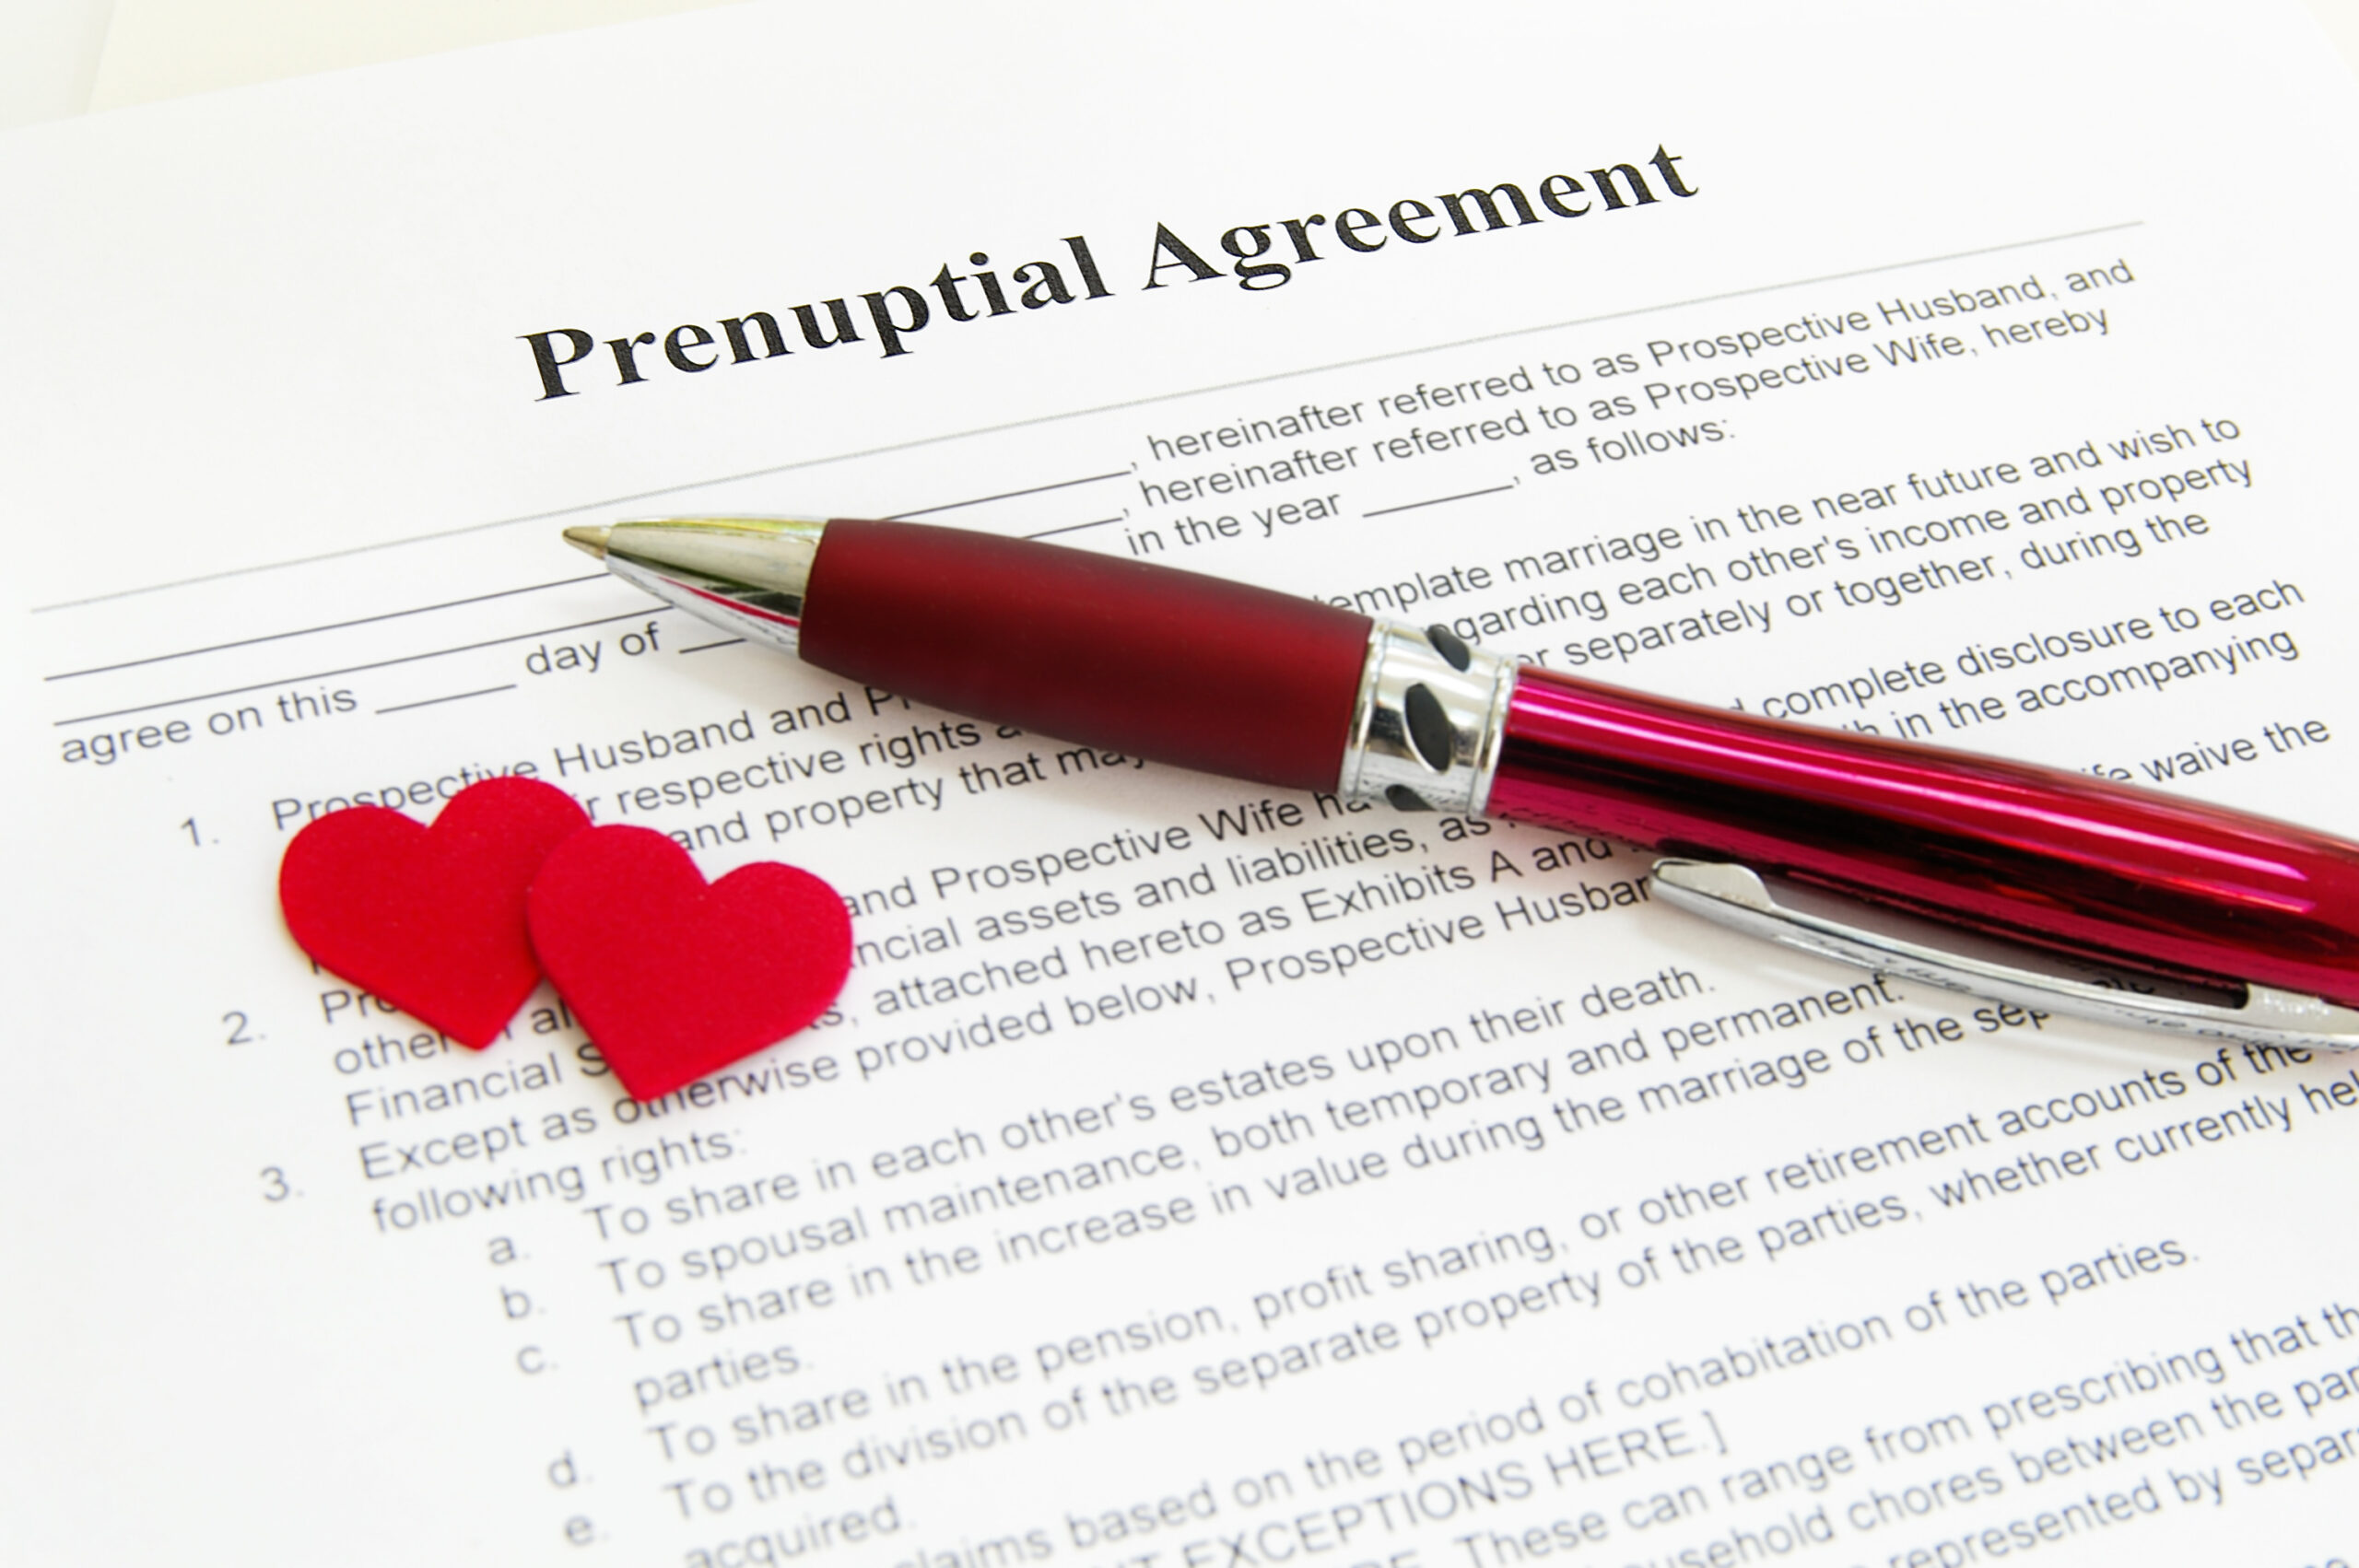 Prenuptial and Postnuptial Exceptions